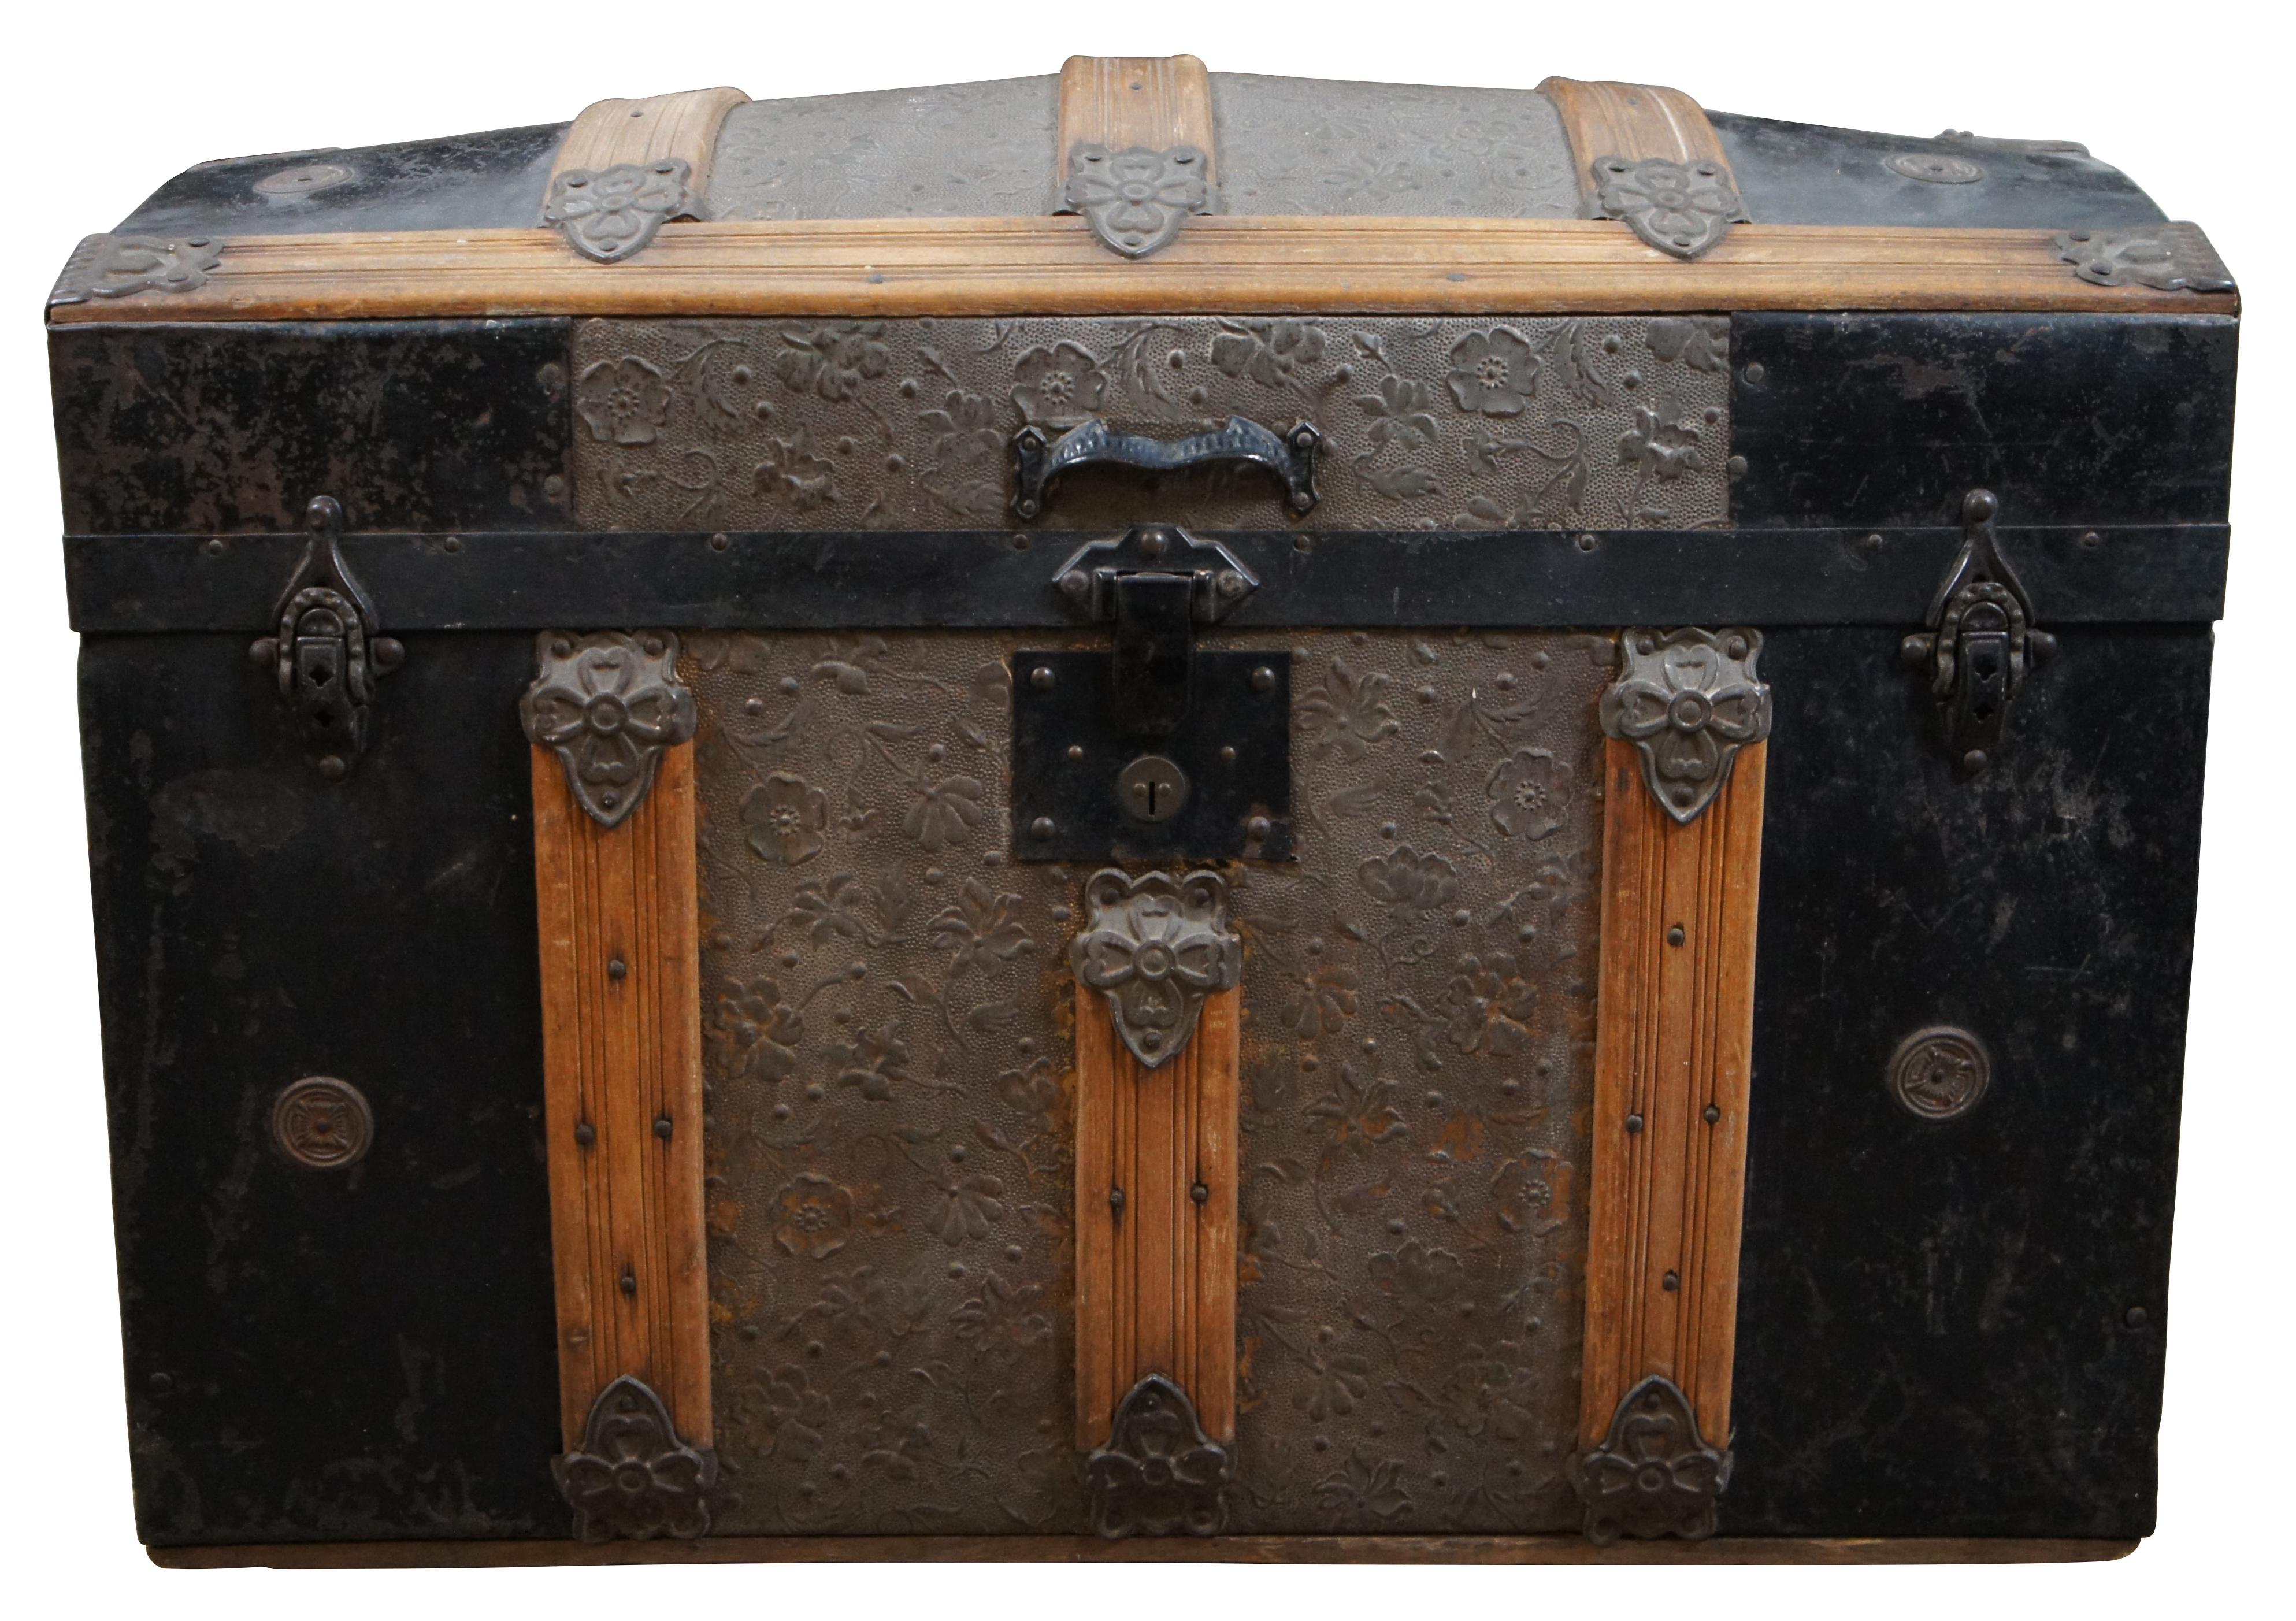 1900s Vintage Belgian Dome Top Trunk with Canvas Over Wood Leather Handles  Brass Hardware